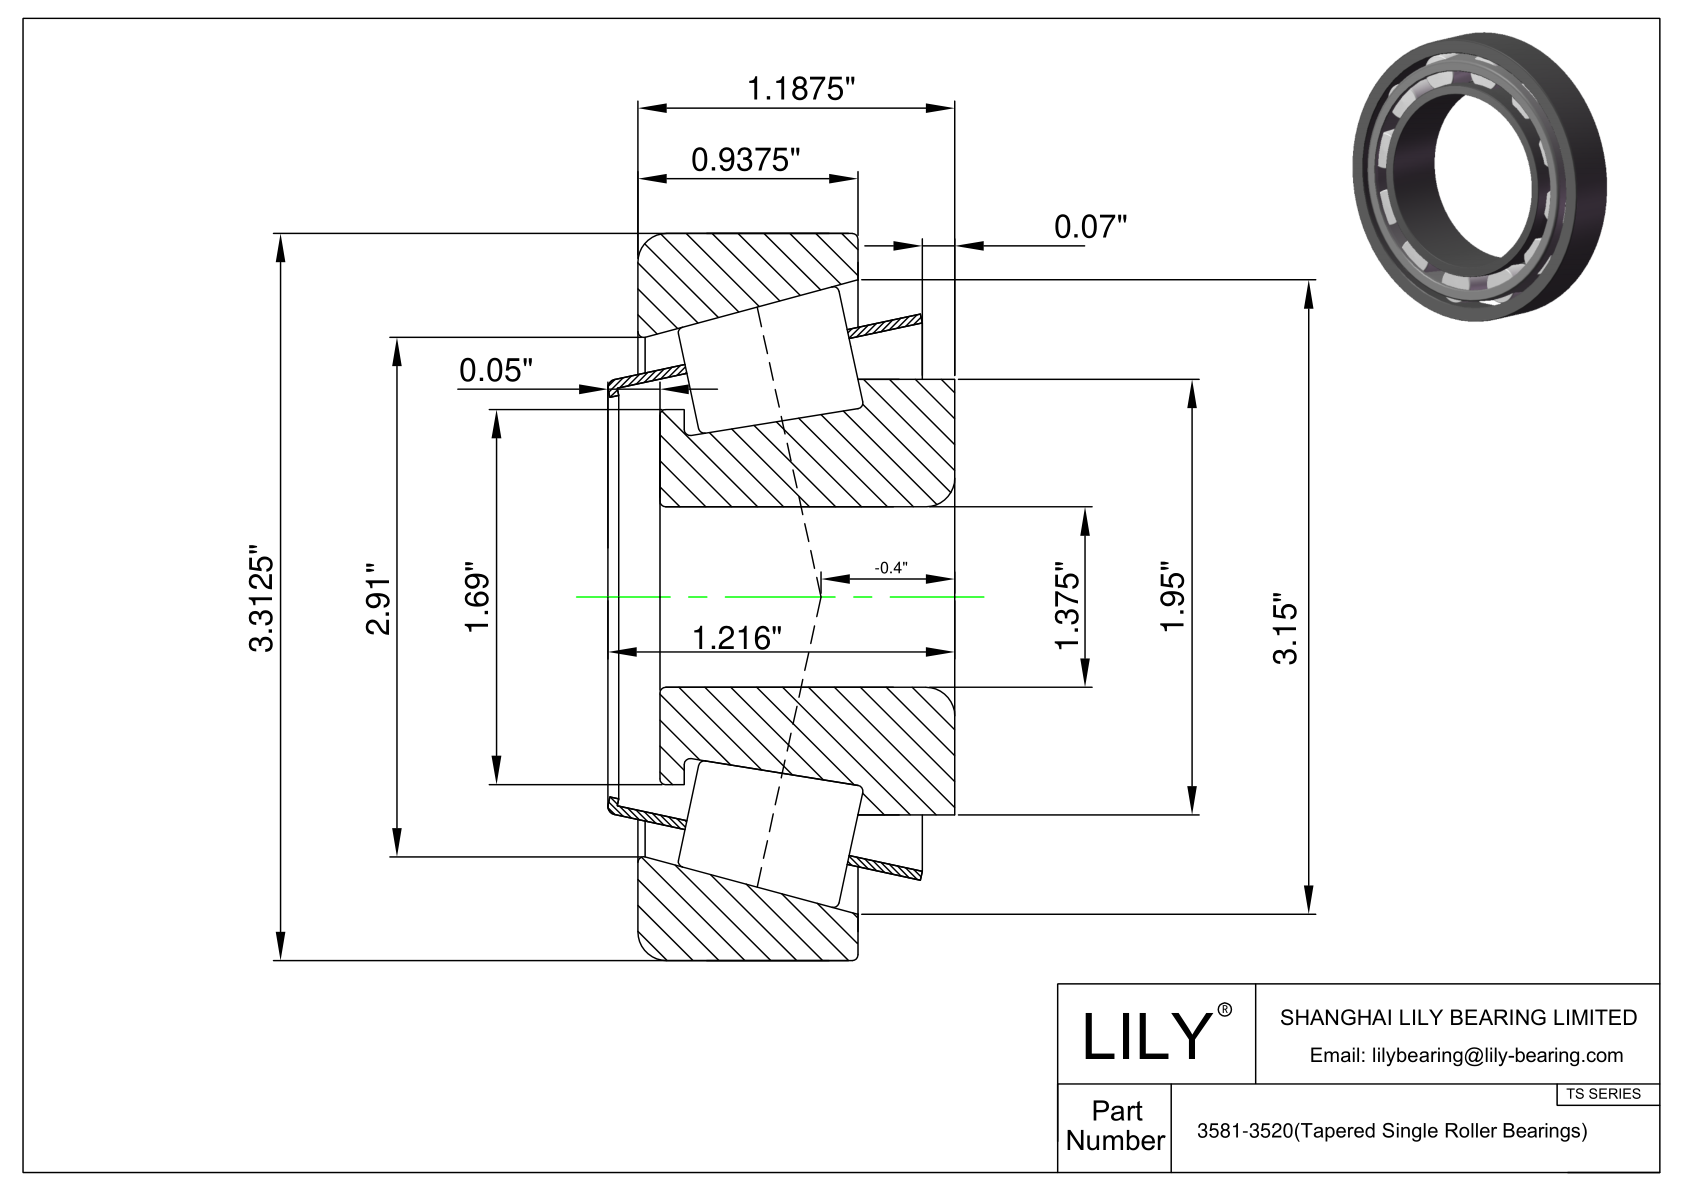 3581-3520 TS (Tapered Single Roller Bearings) (Imperial) cad drawing